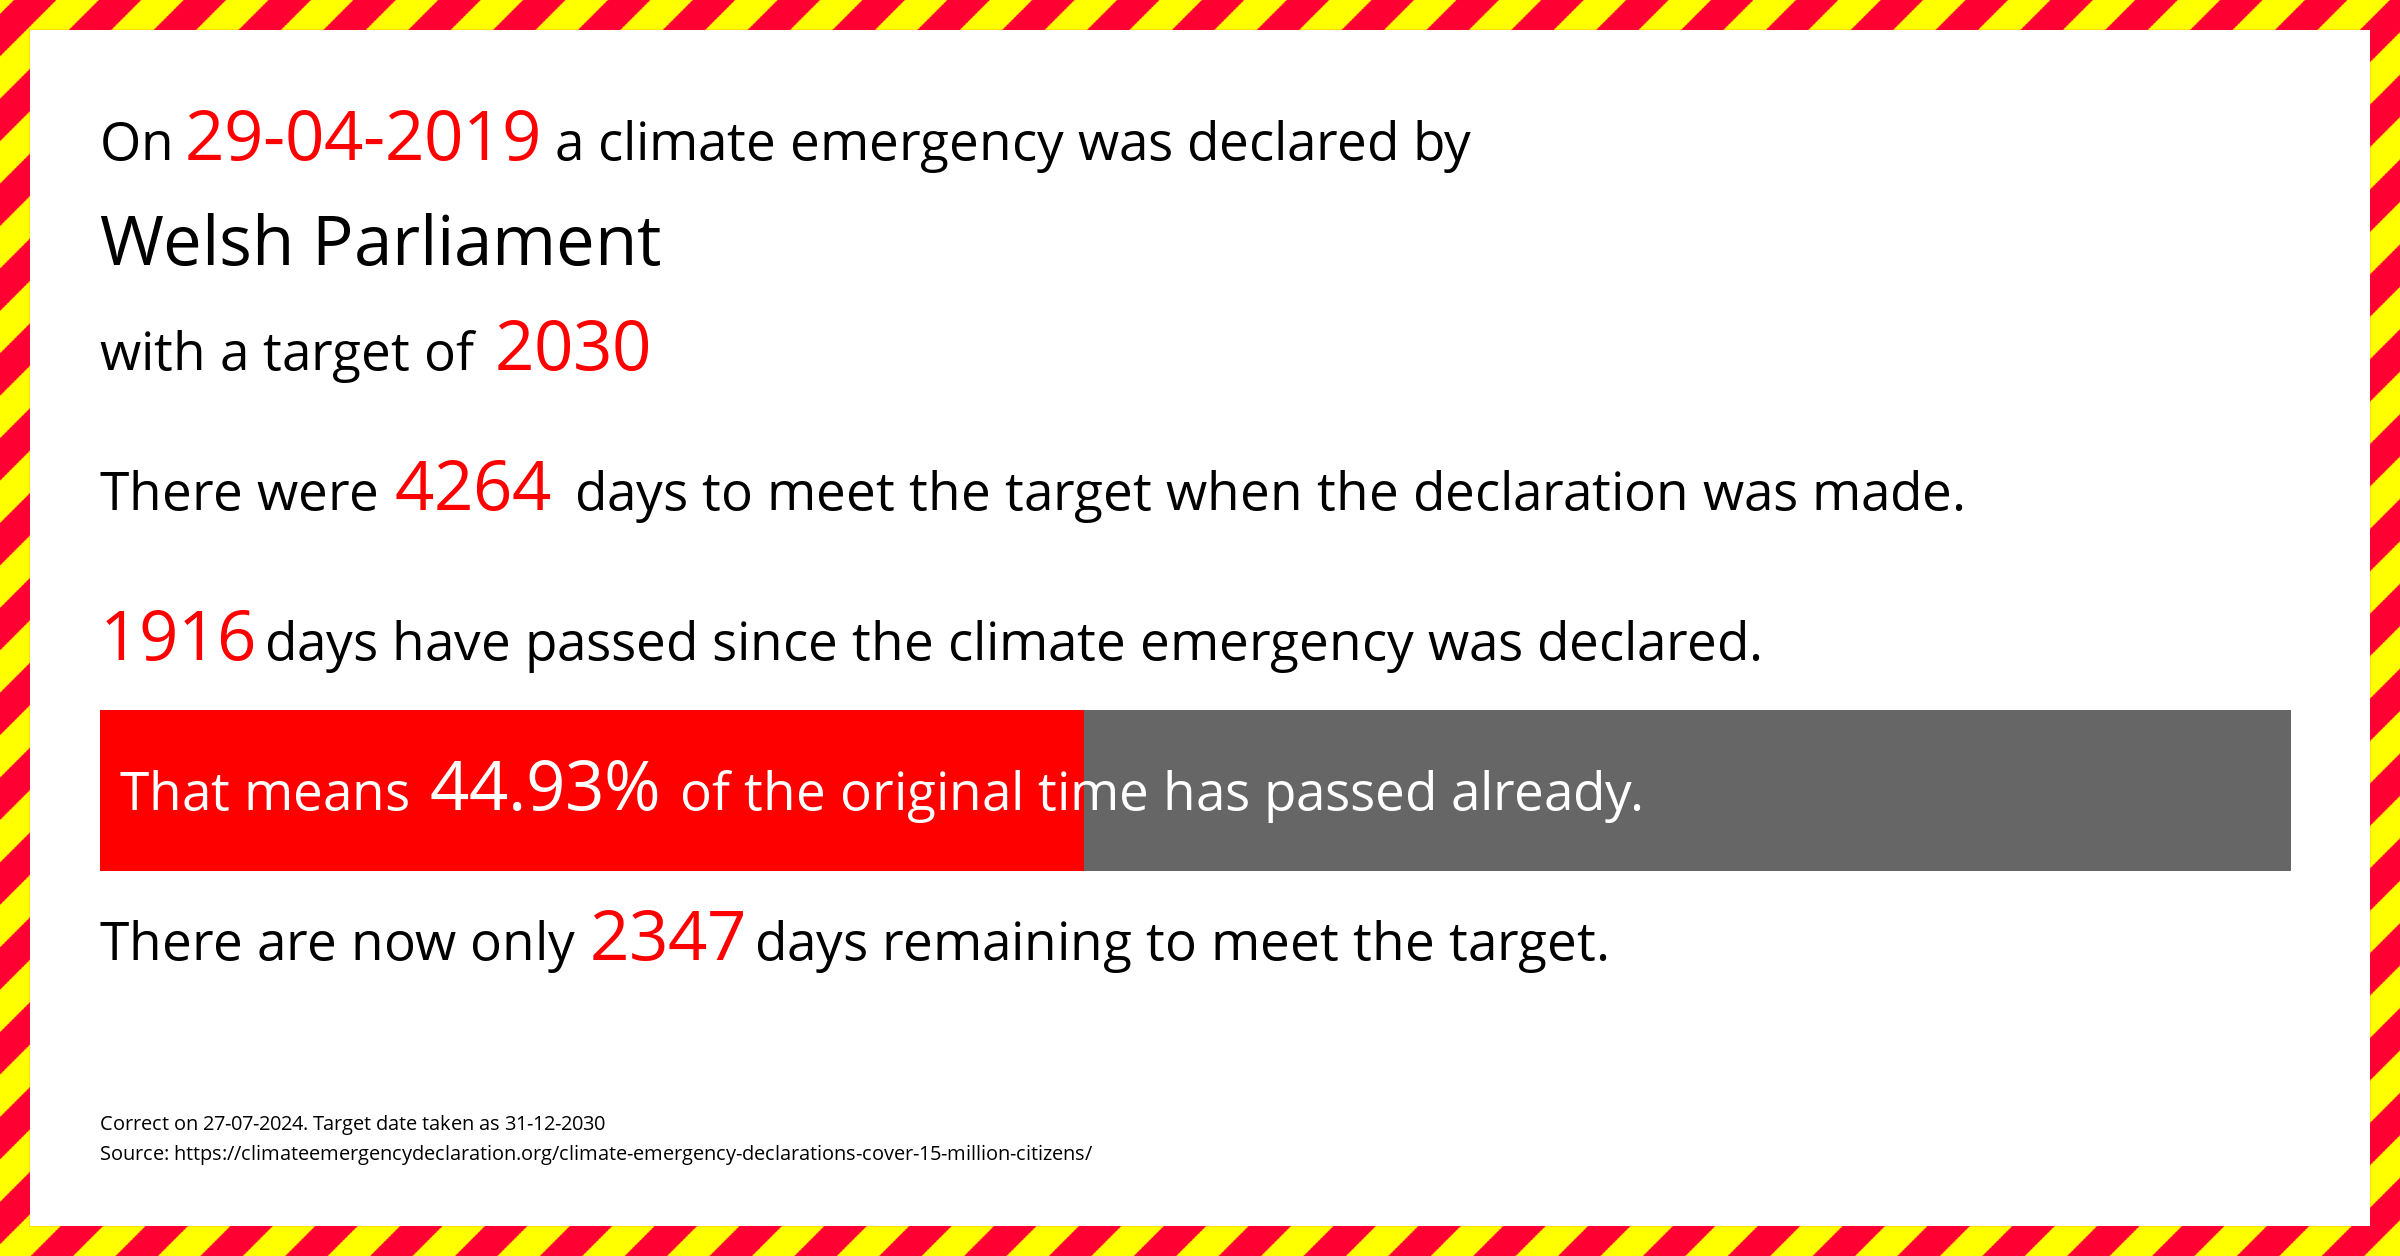 Welsh Parliament declared a Climate emergency on Monday 29th April 2019, with a target of 2030.